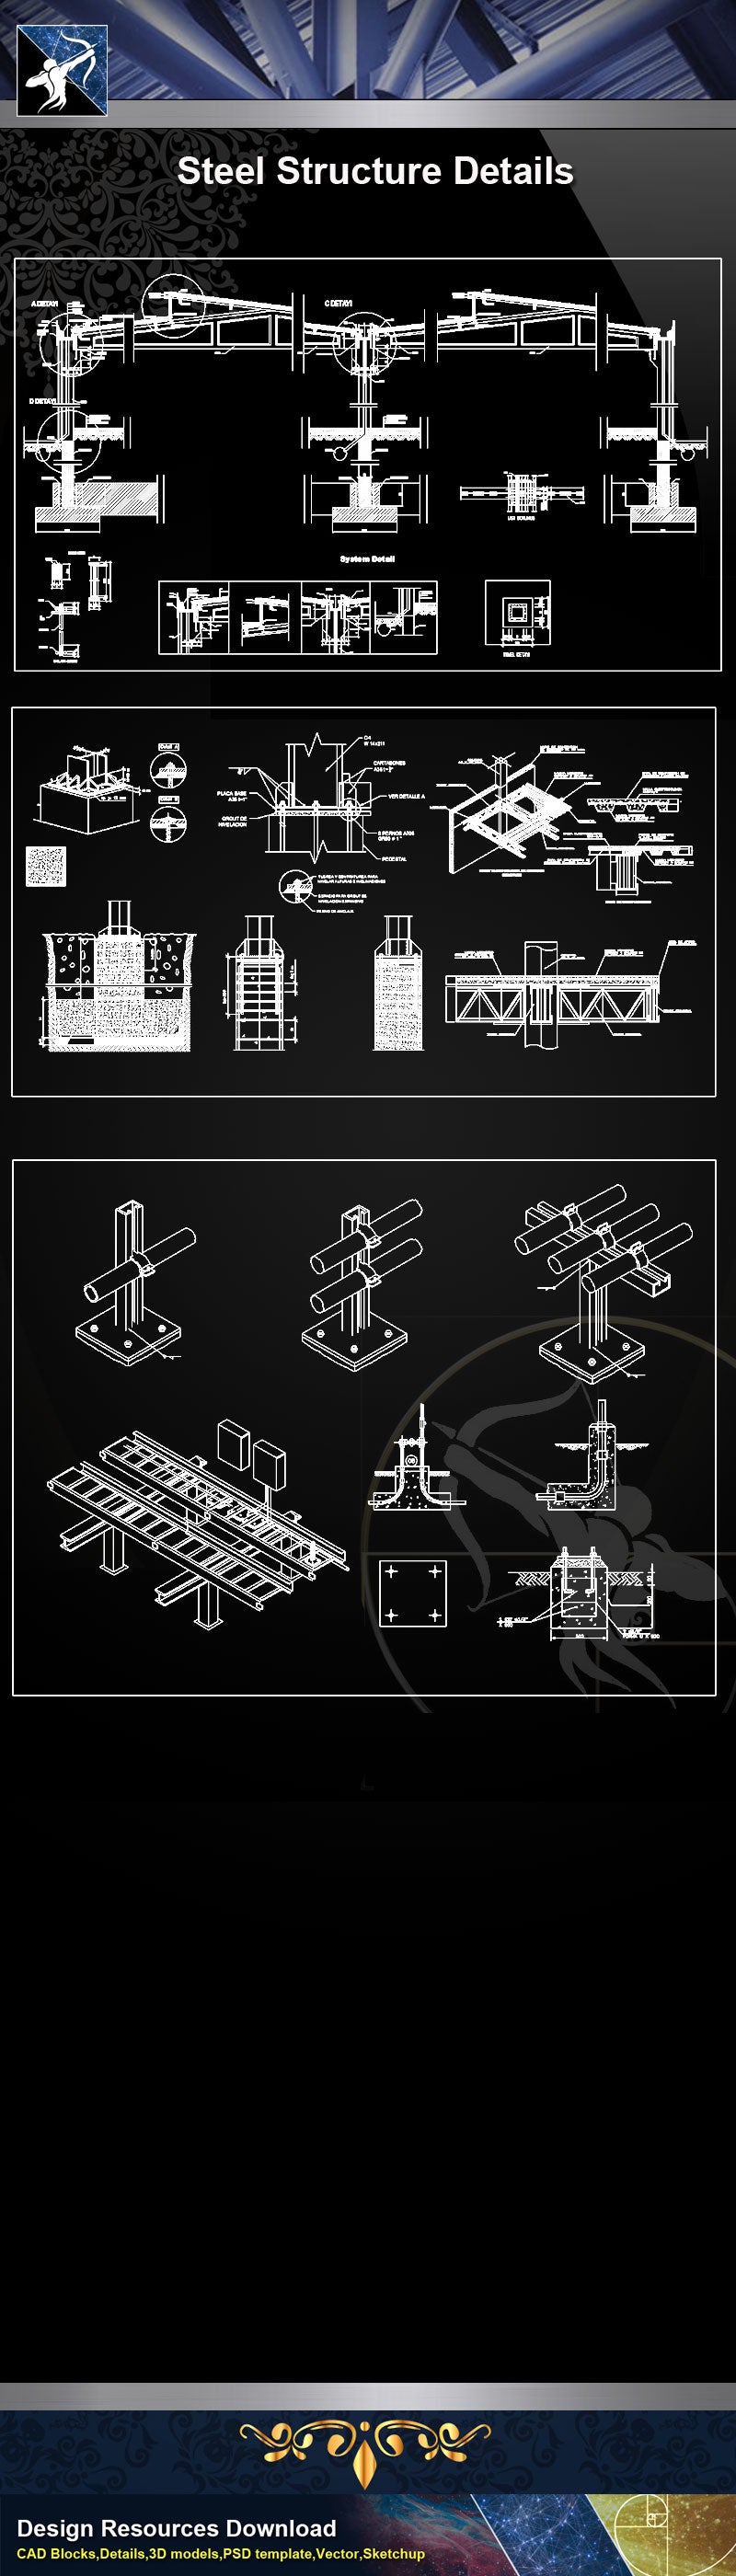 【Steel Structure Details】Steel Structure Details Collection V.4